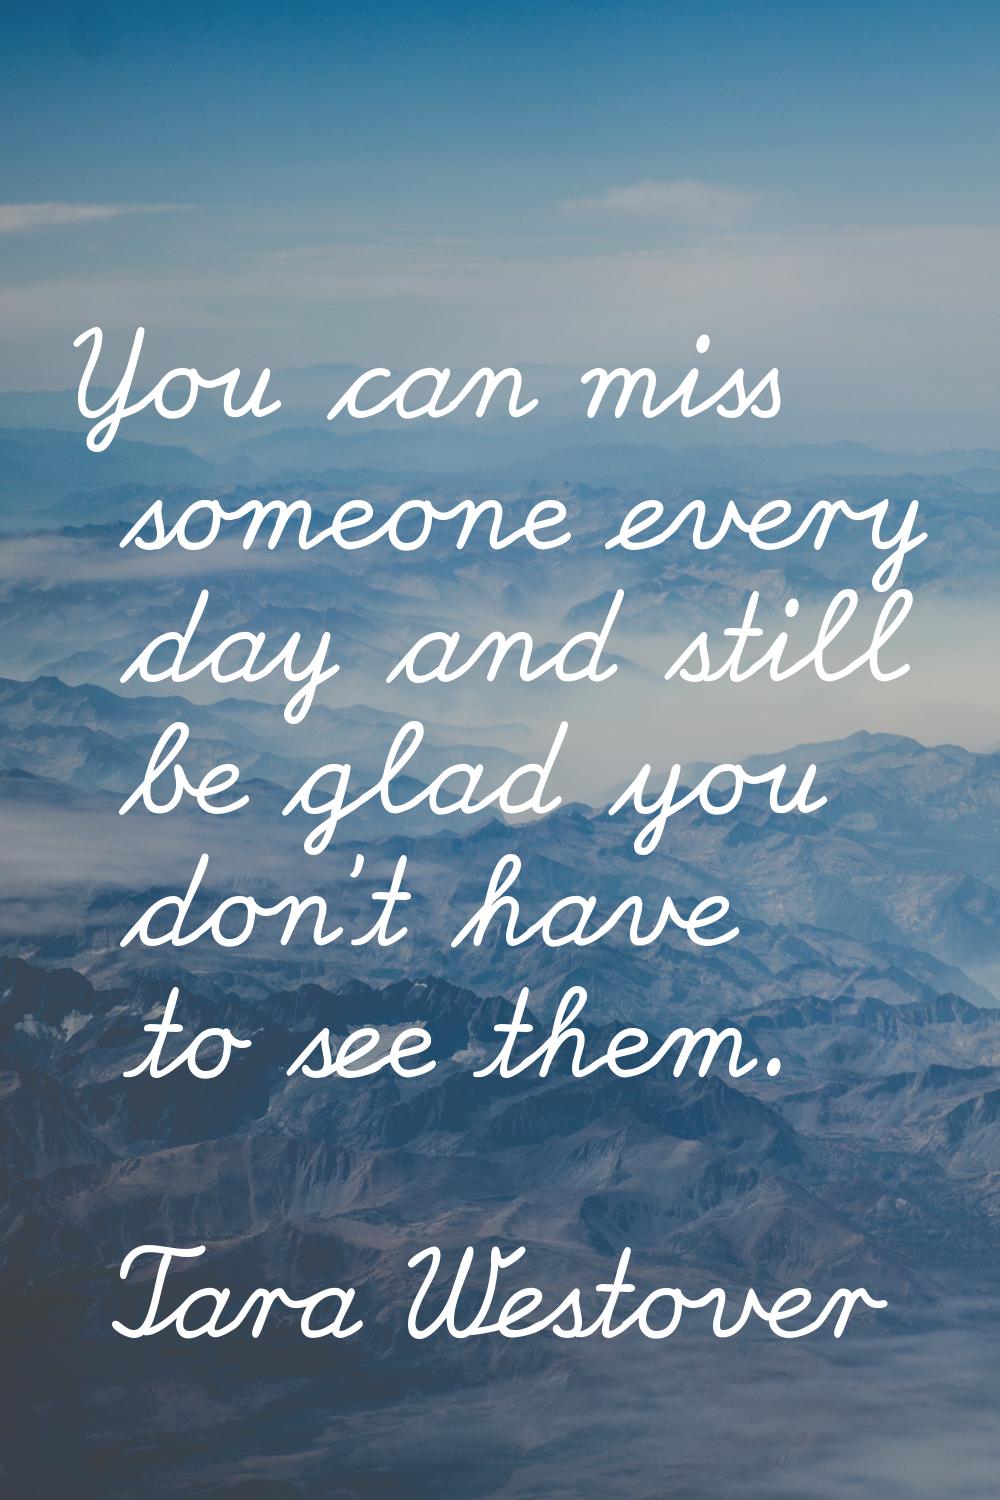 You can miss someone every day and still be glad you don't have to see them.